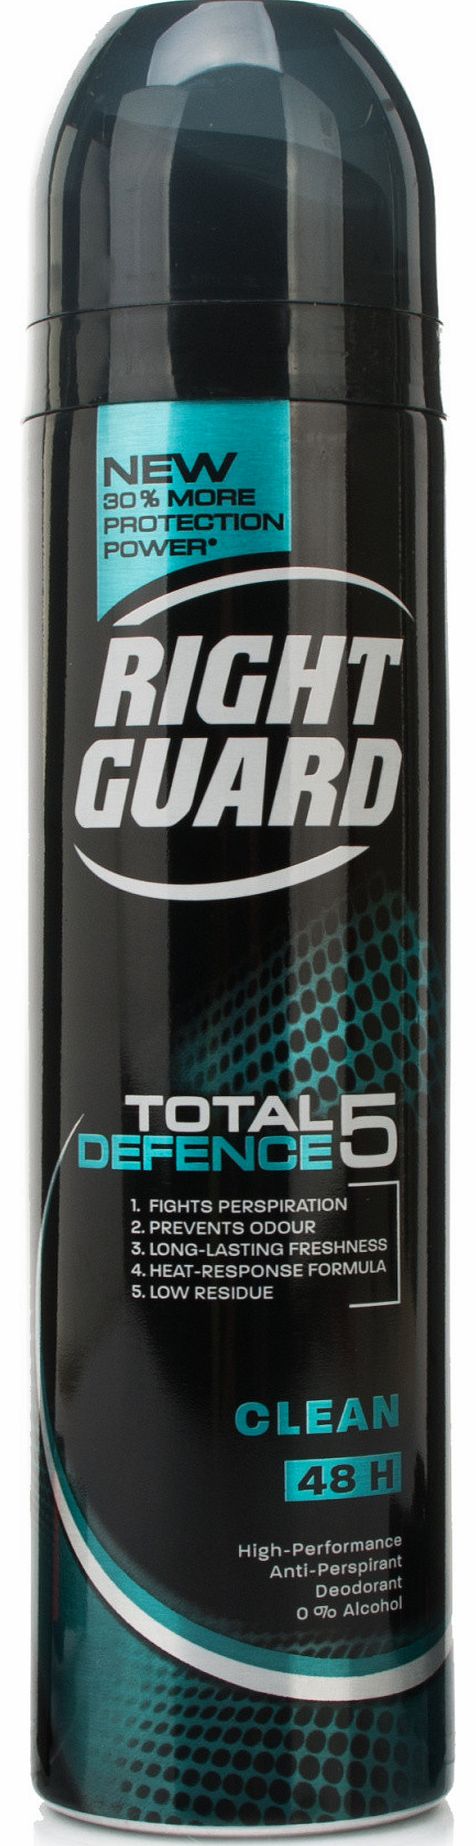 Right Guard Total Defence 5 Clean